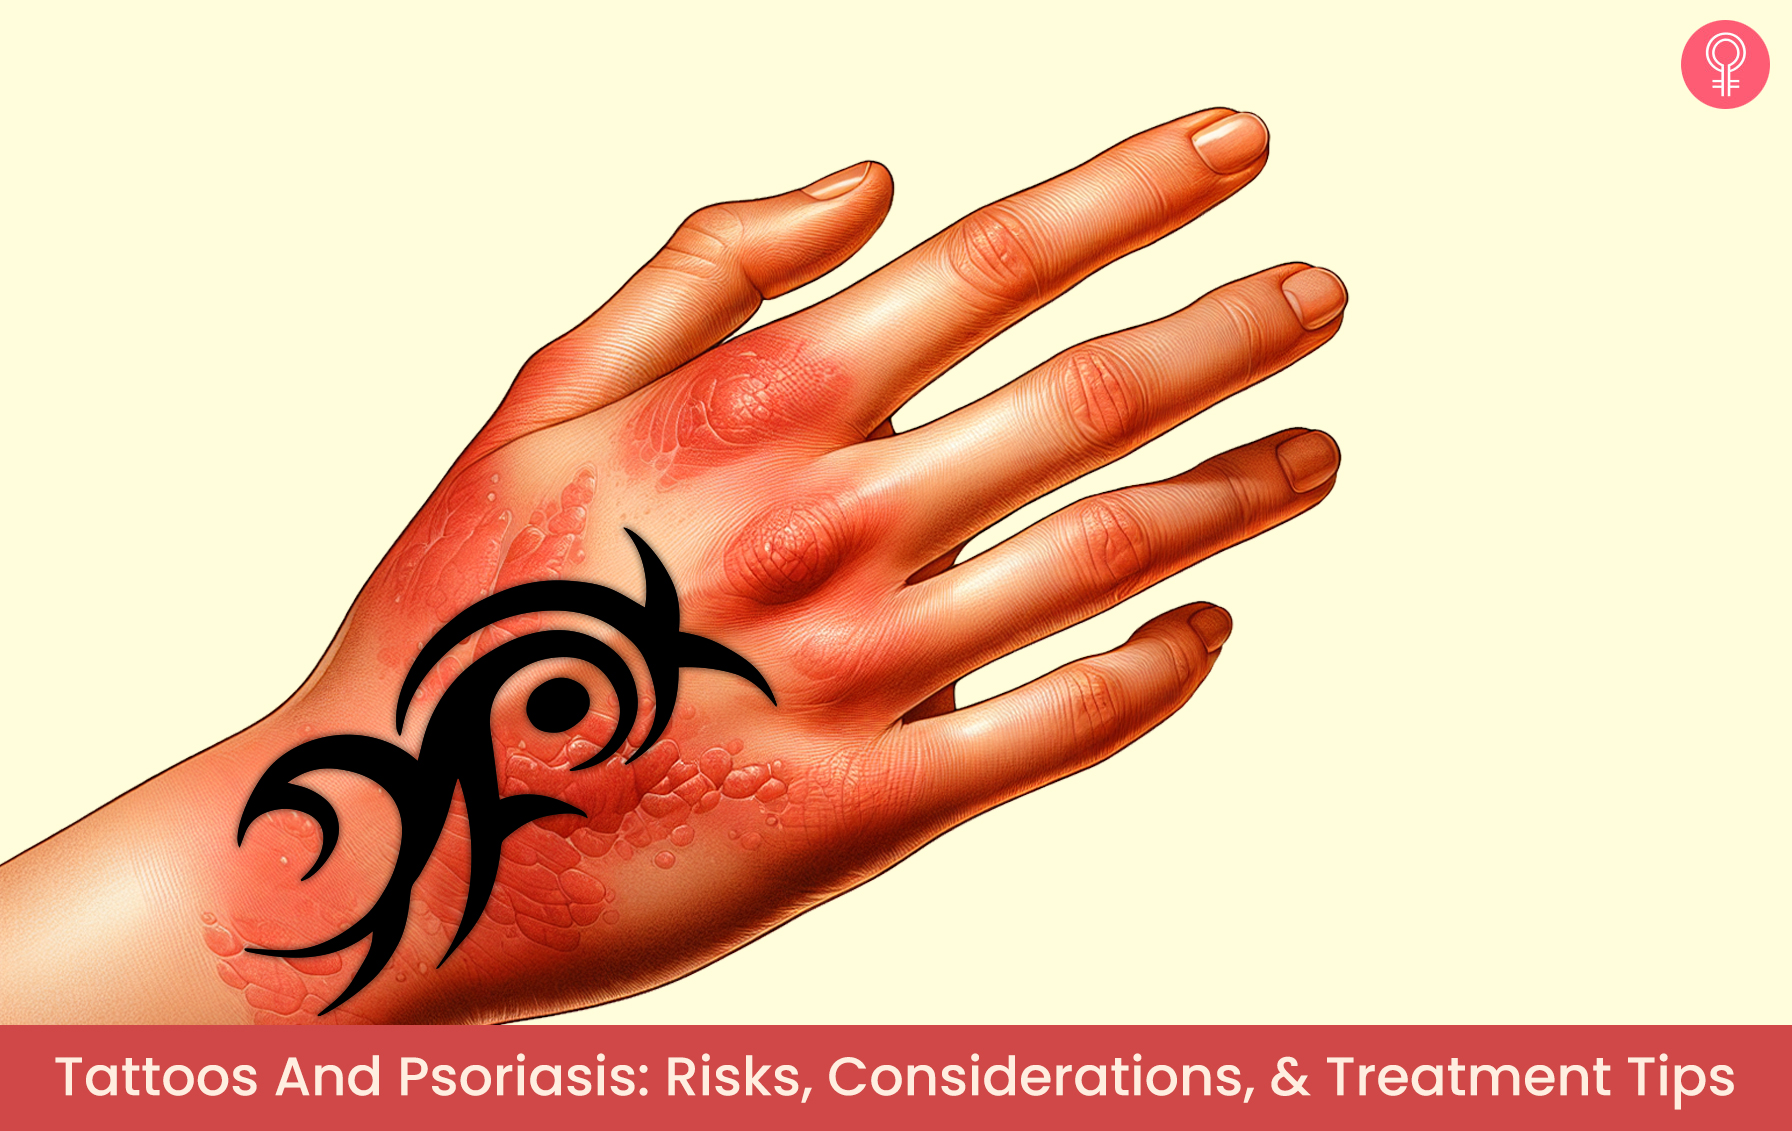 Tattoos And Psoriasis: Risks, Considerations, & Treatment Tips